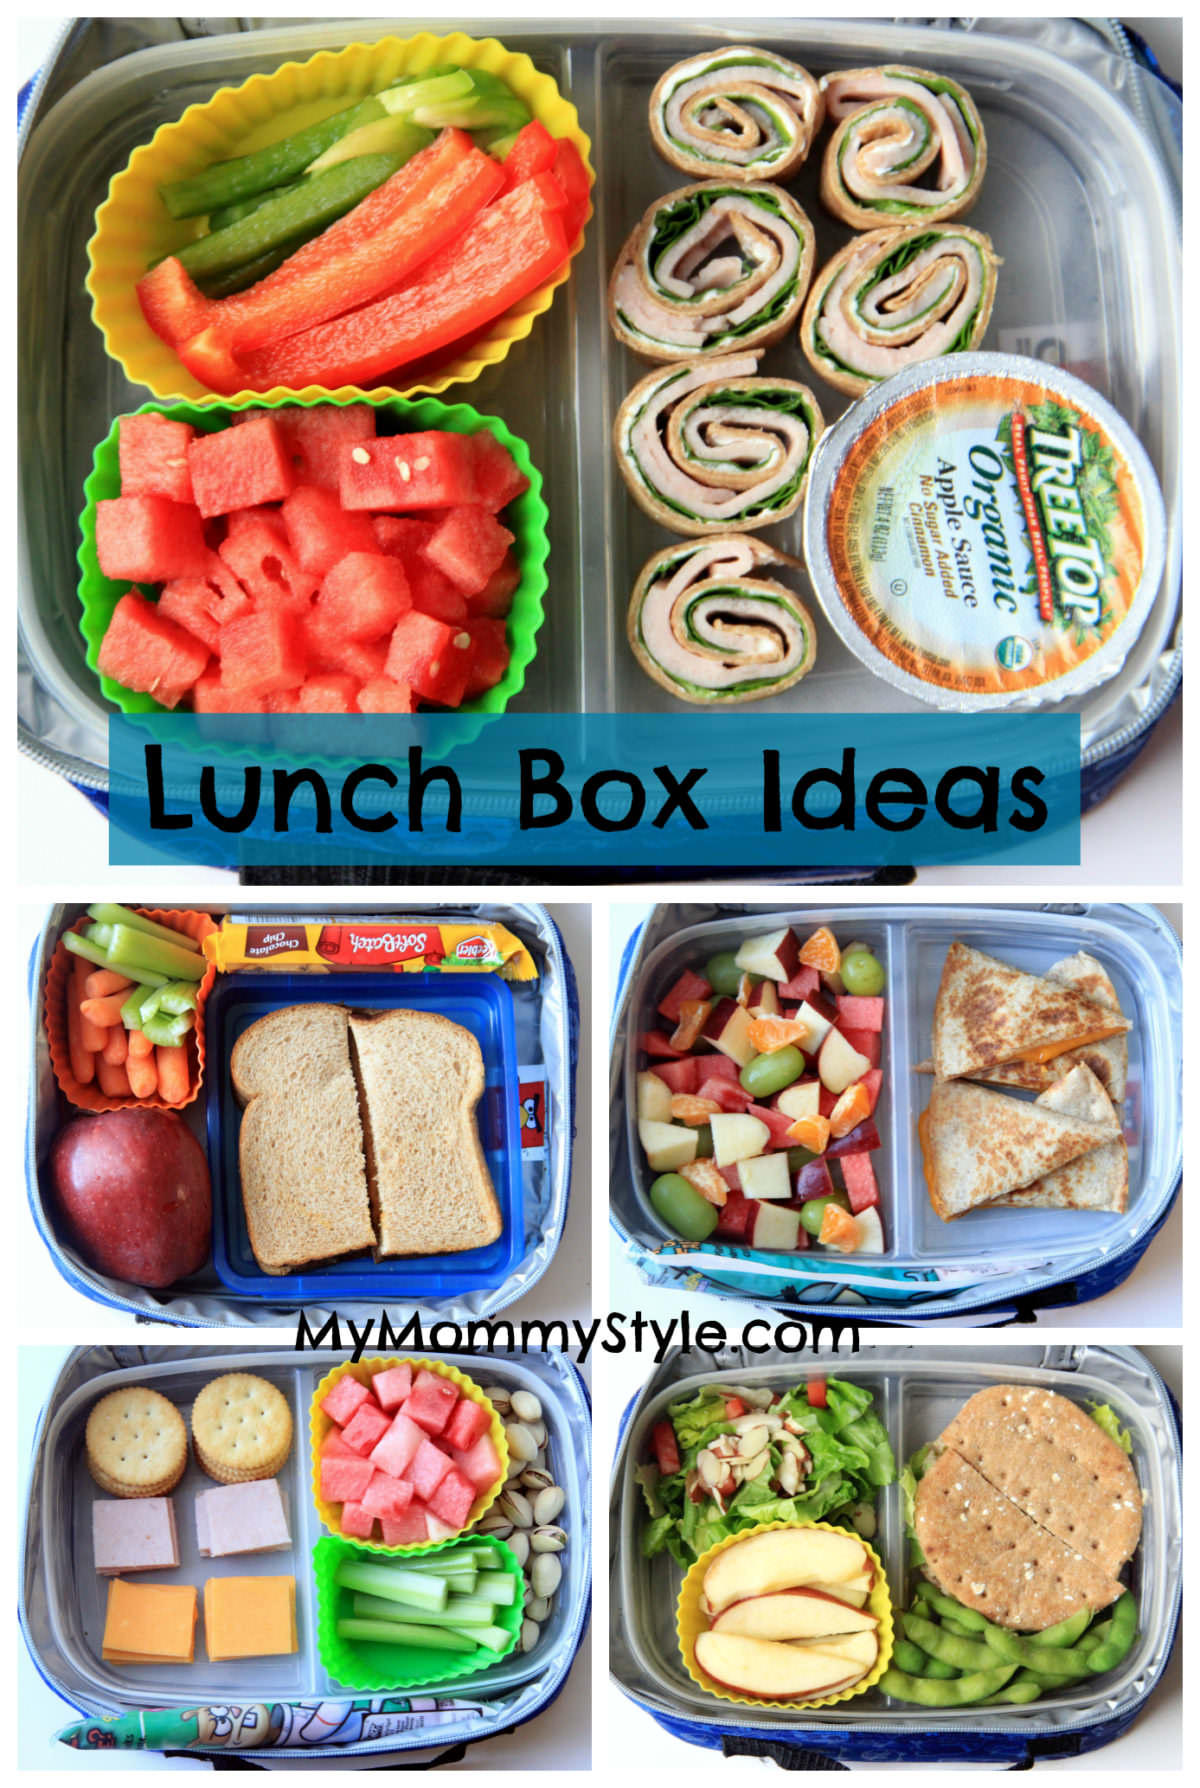 https://www.mymommystyle.com/wp-content/uploads/2013/09/Lunch-box-ideas-kid-lunches-school-lunch-cold-lunch-ideas-healthy-school-lunch-clean-eating-for-kids.jpg